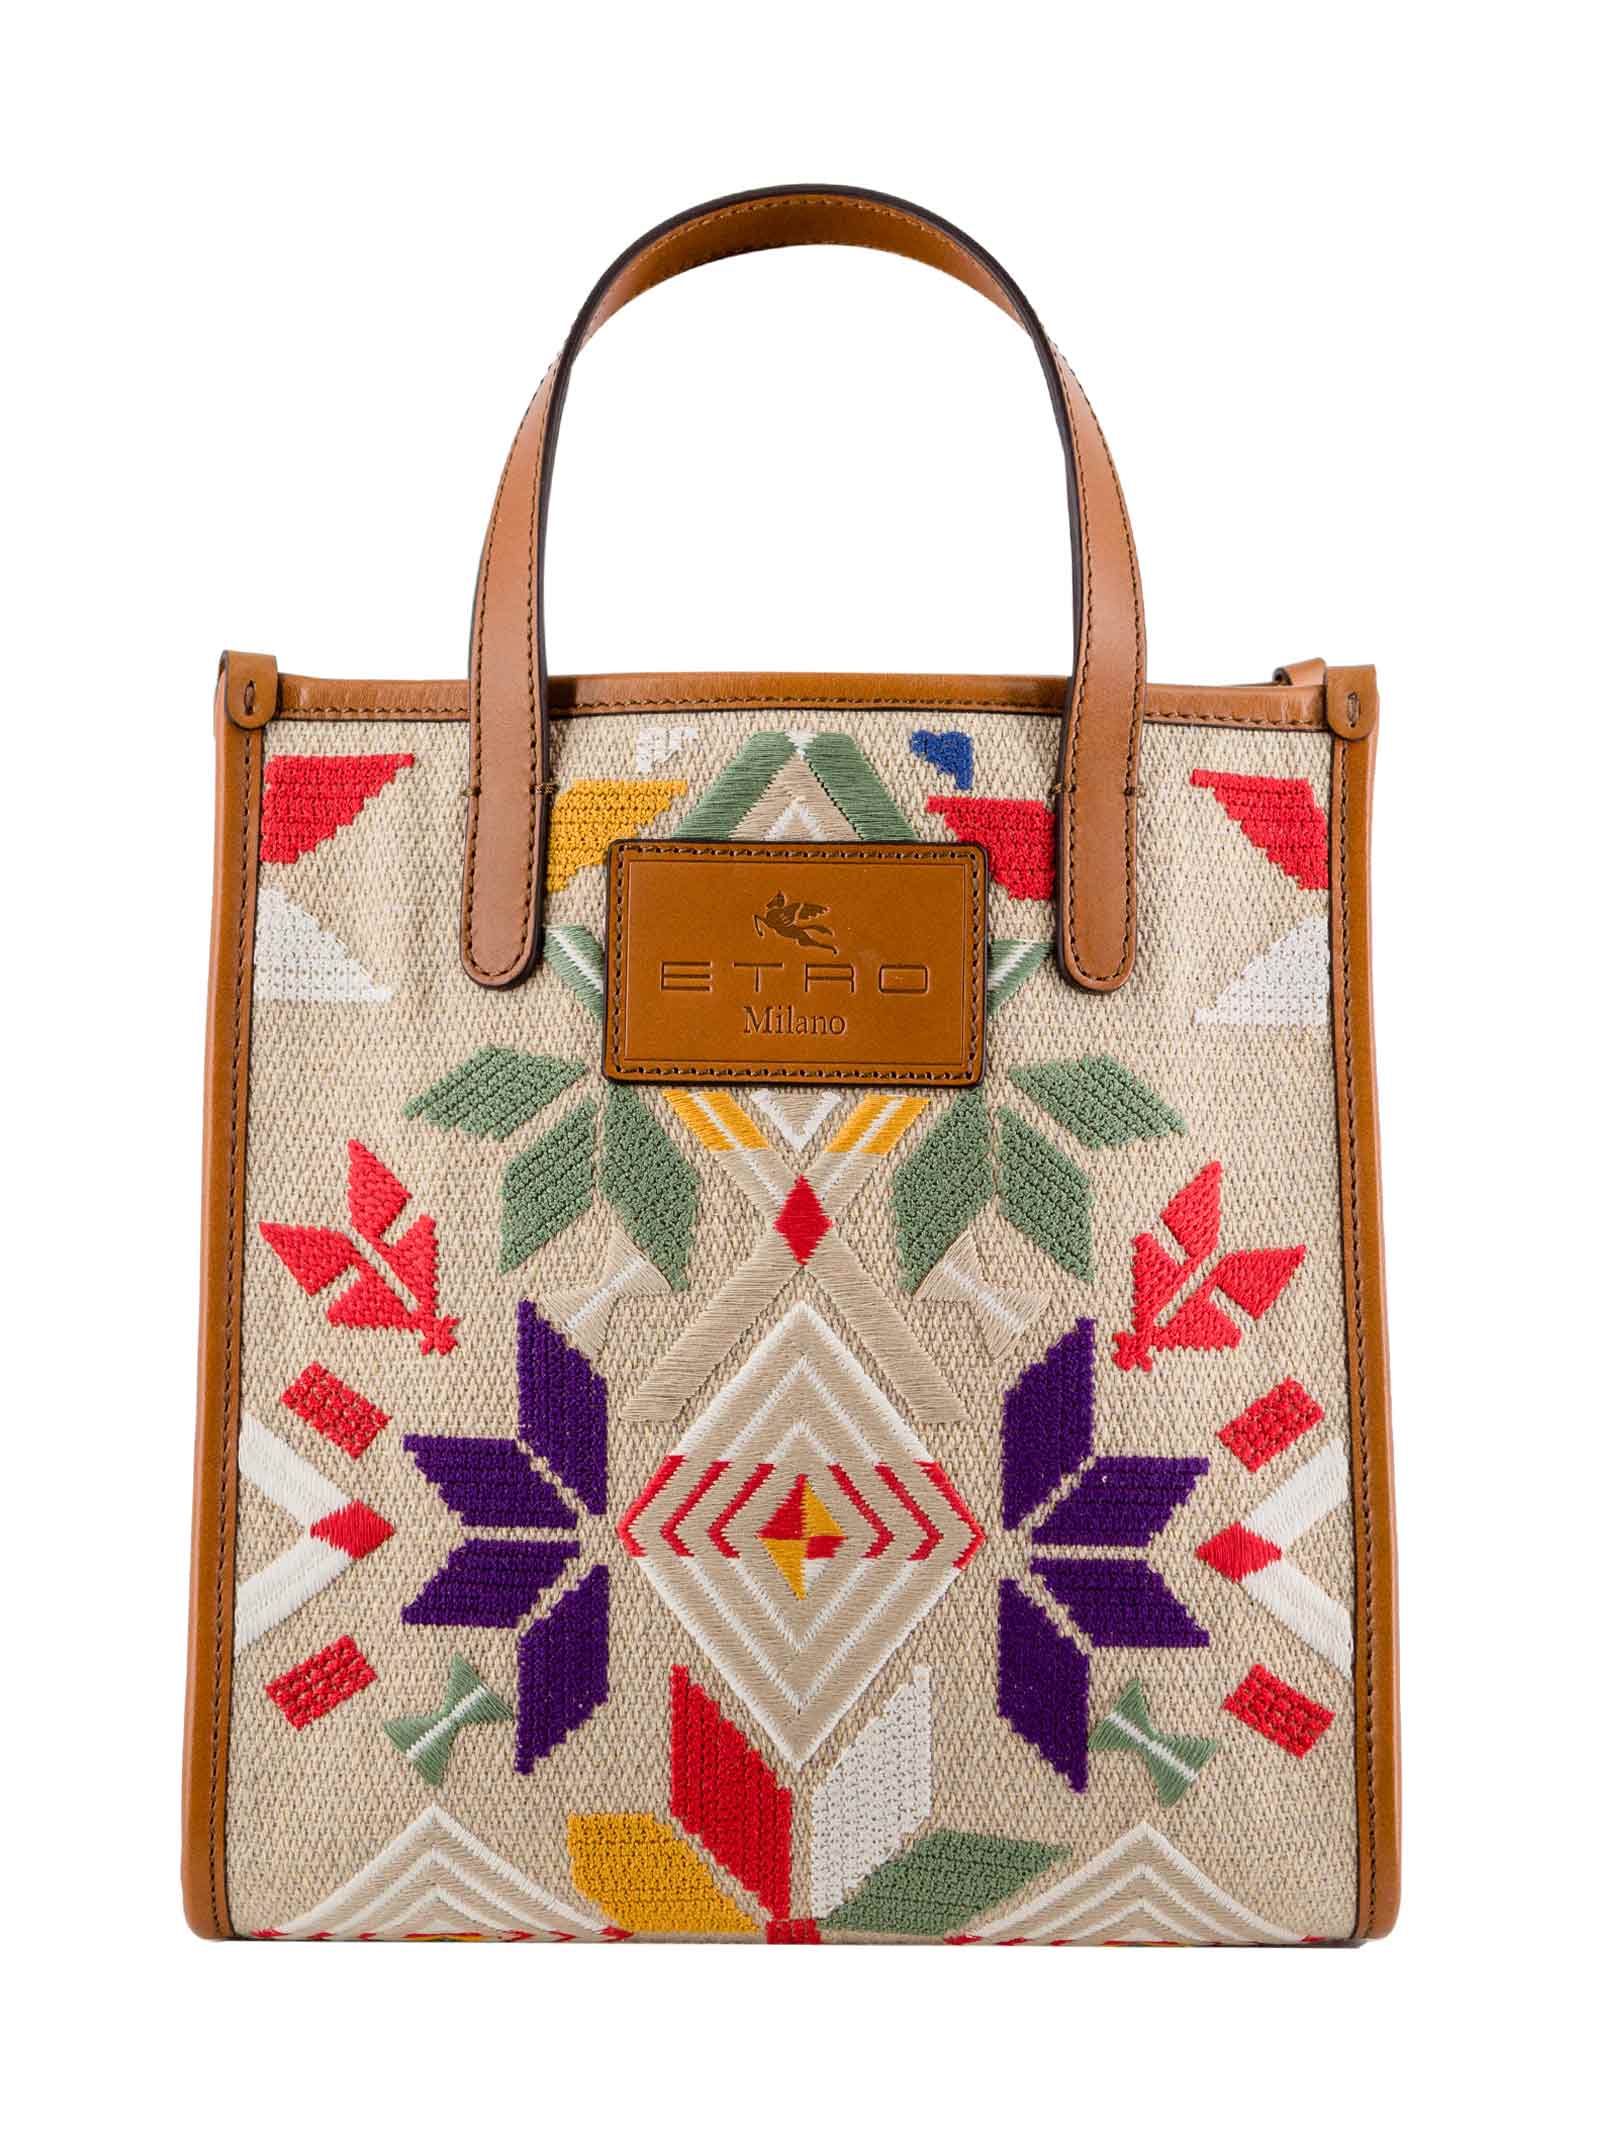 Etro Calf-leather Wool Blend Tote Bag